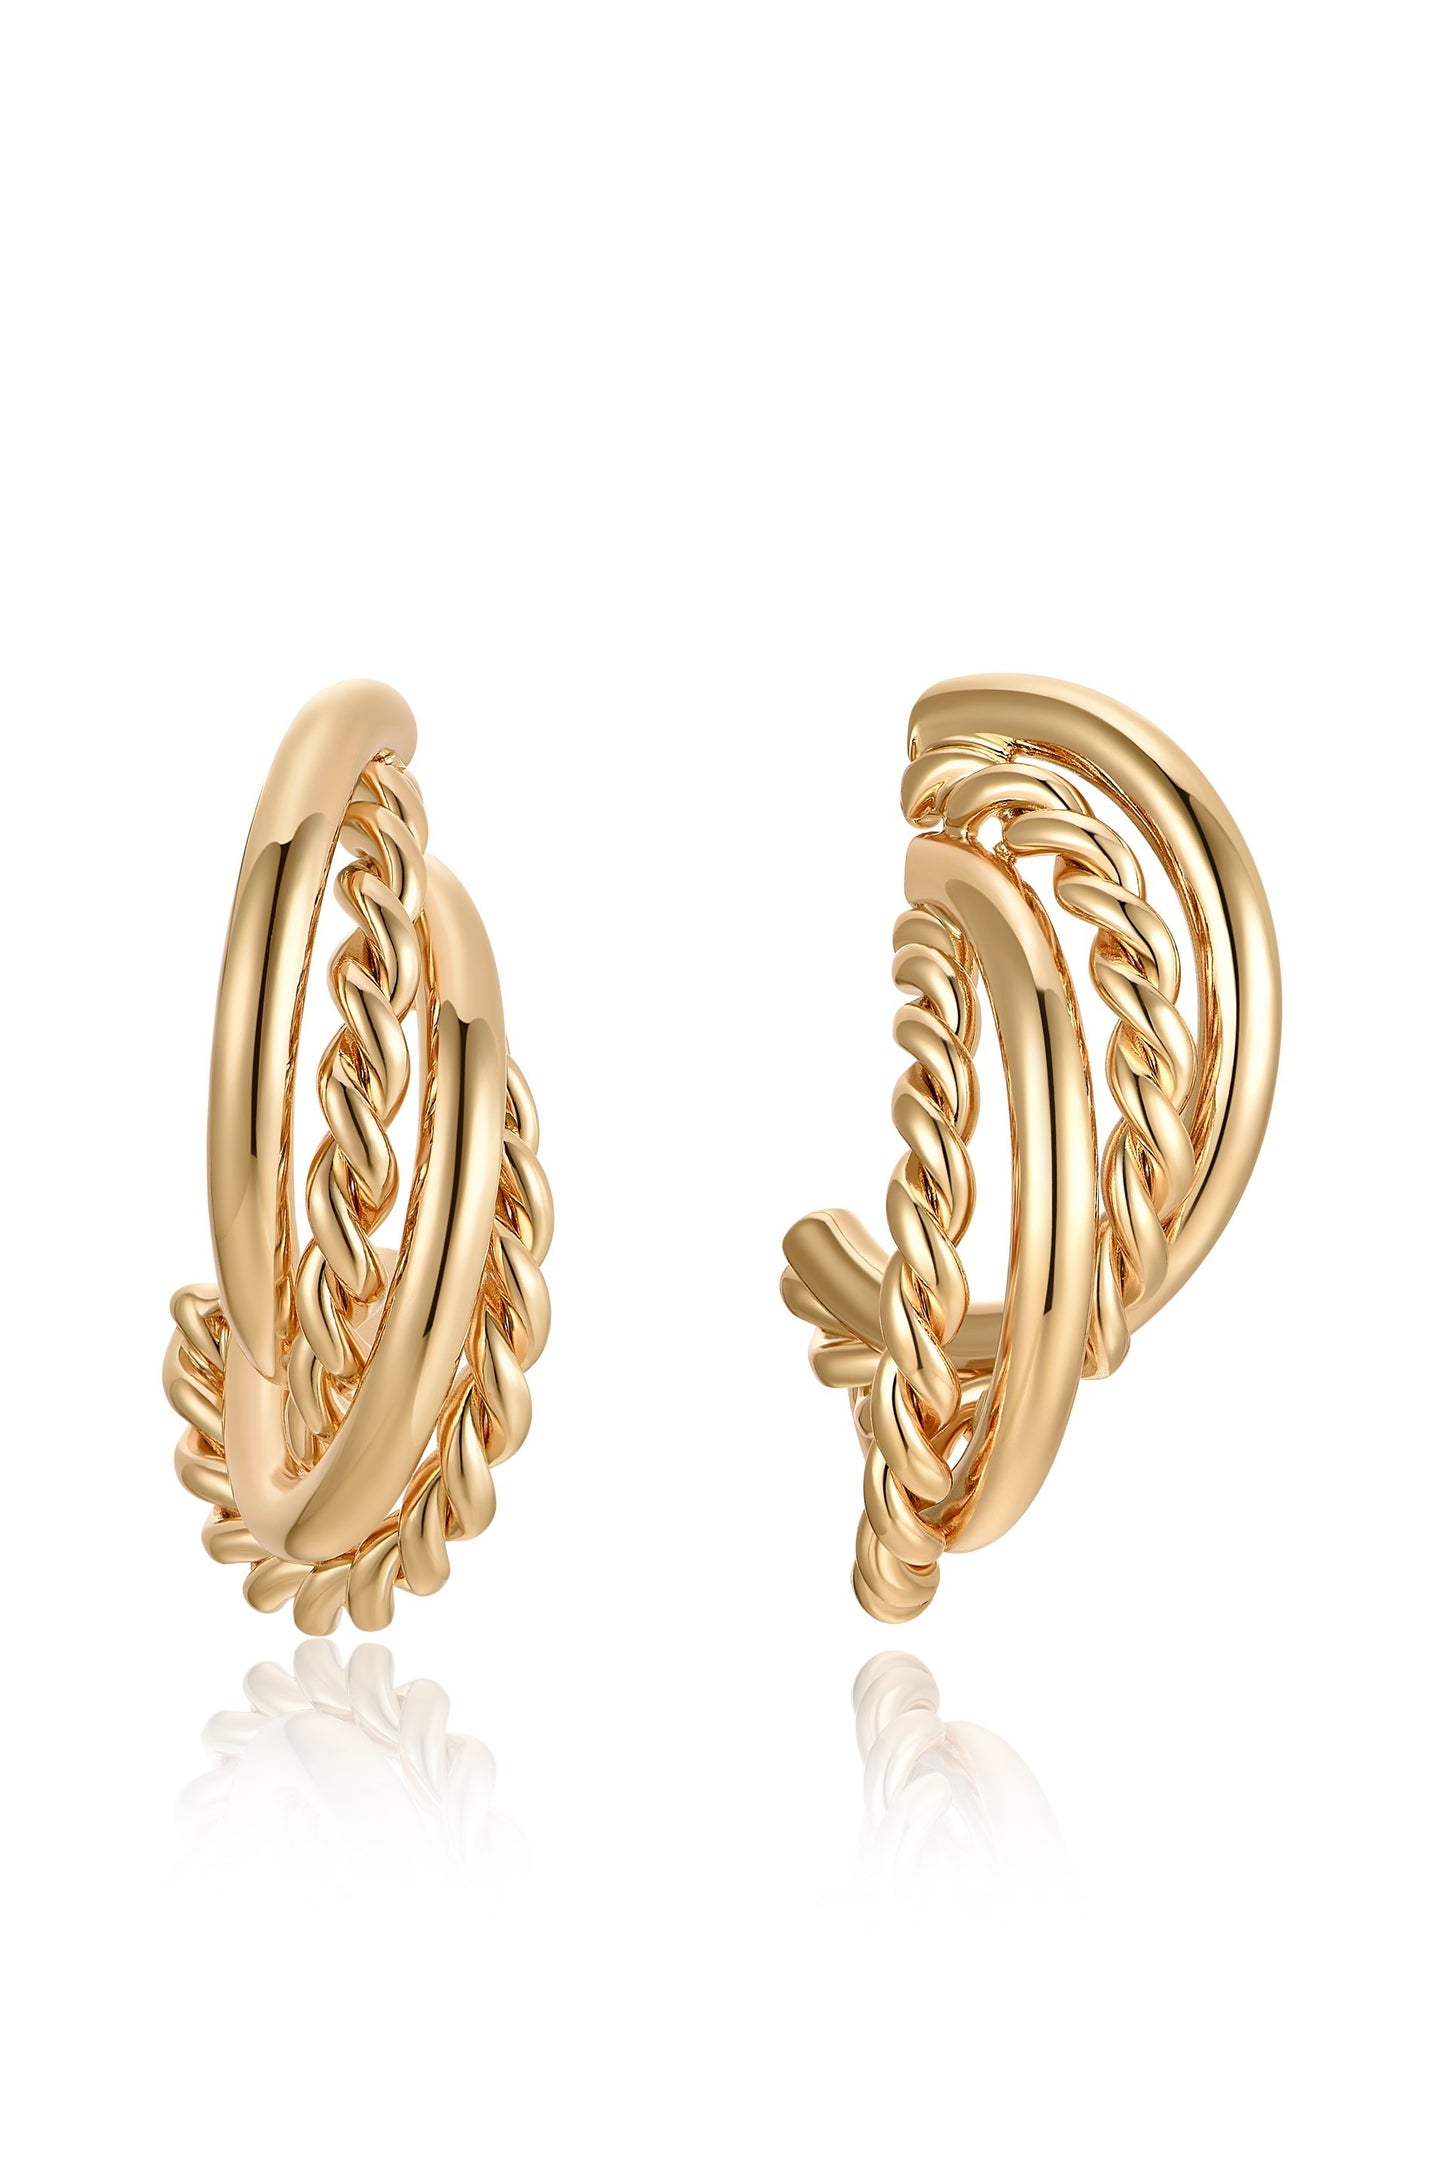 Twists and Turns 18k Gold Plated Hoop Earrings